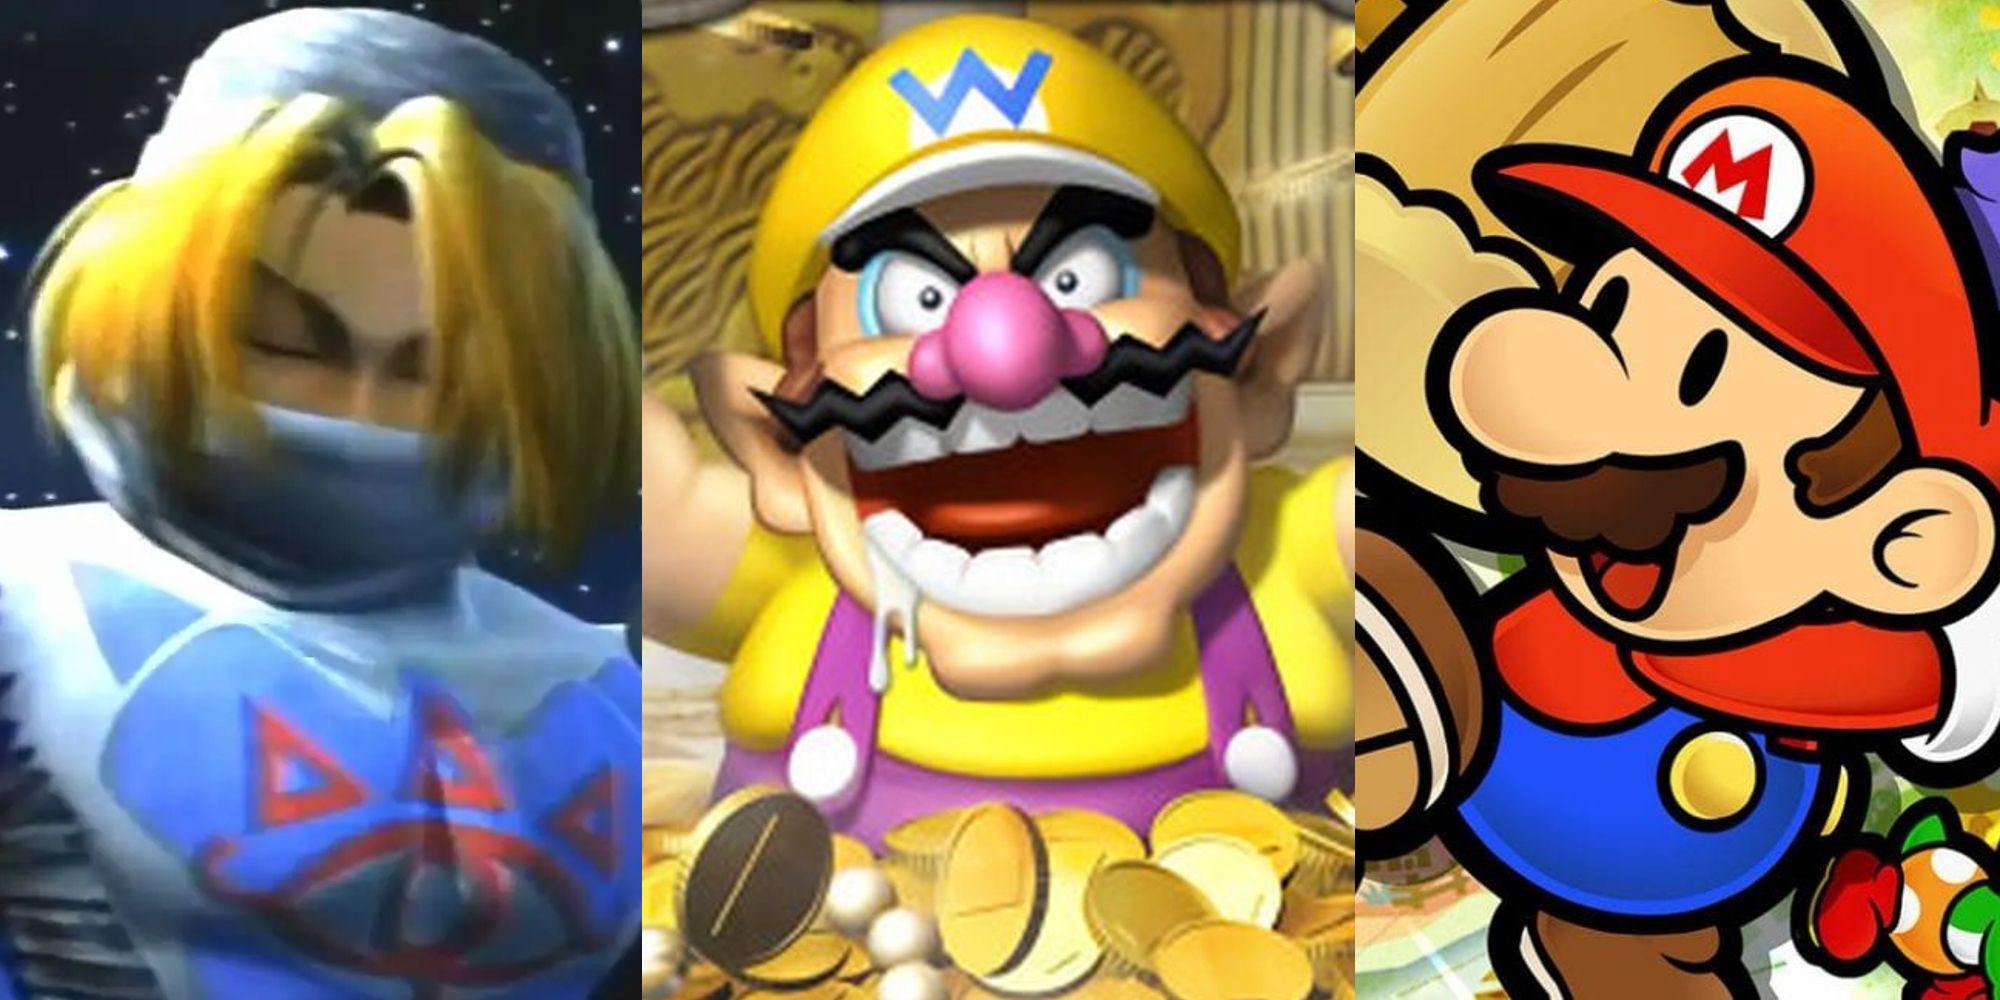 Sheik in the Melee intro; Wario in a money pile; Paper Mario with a hammer